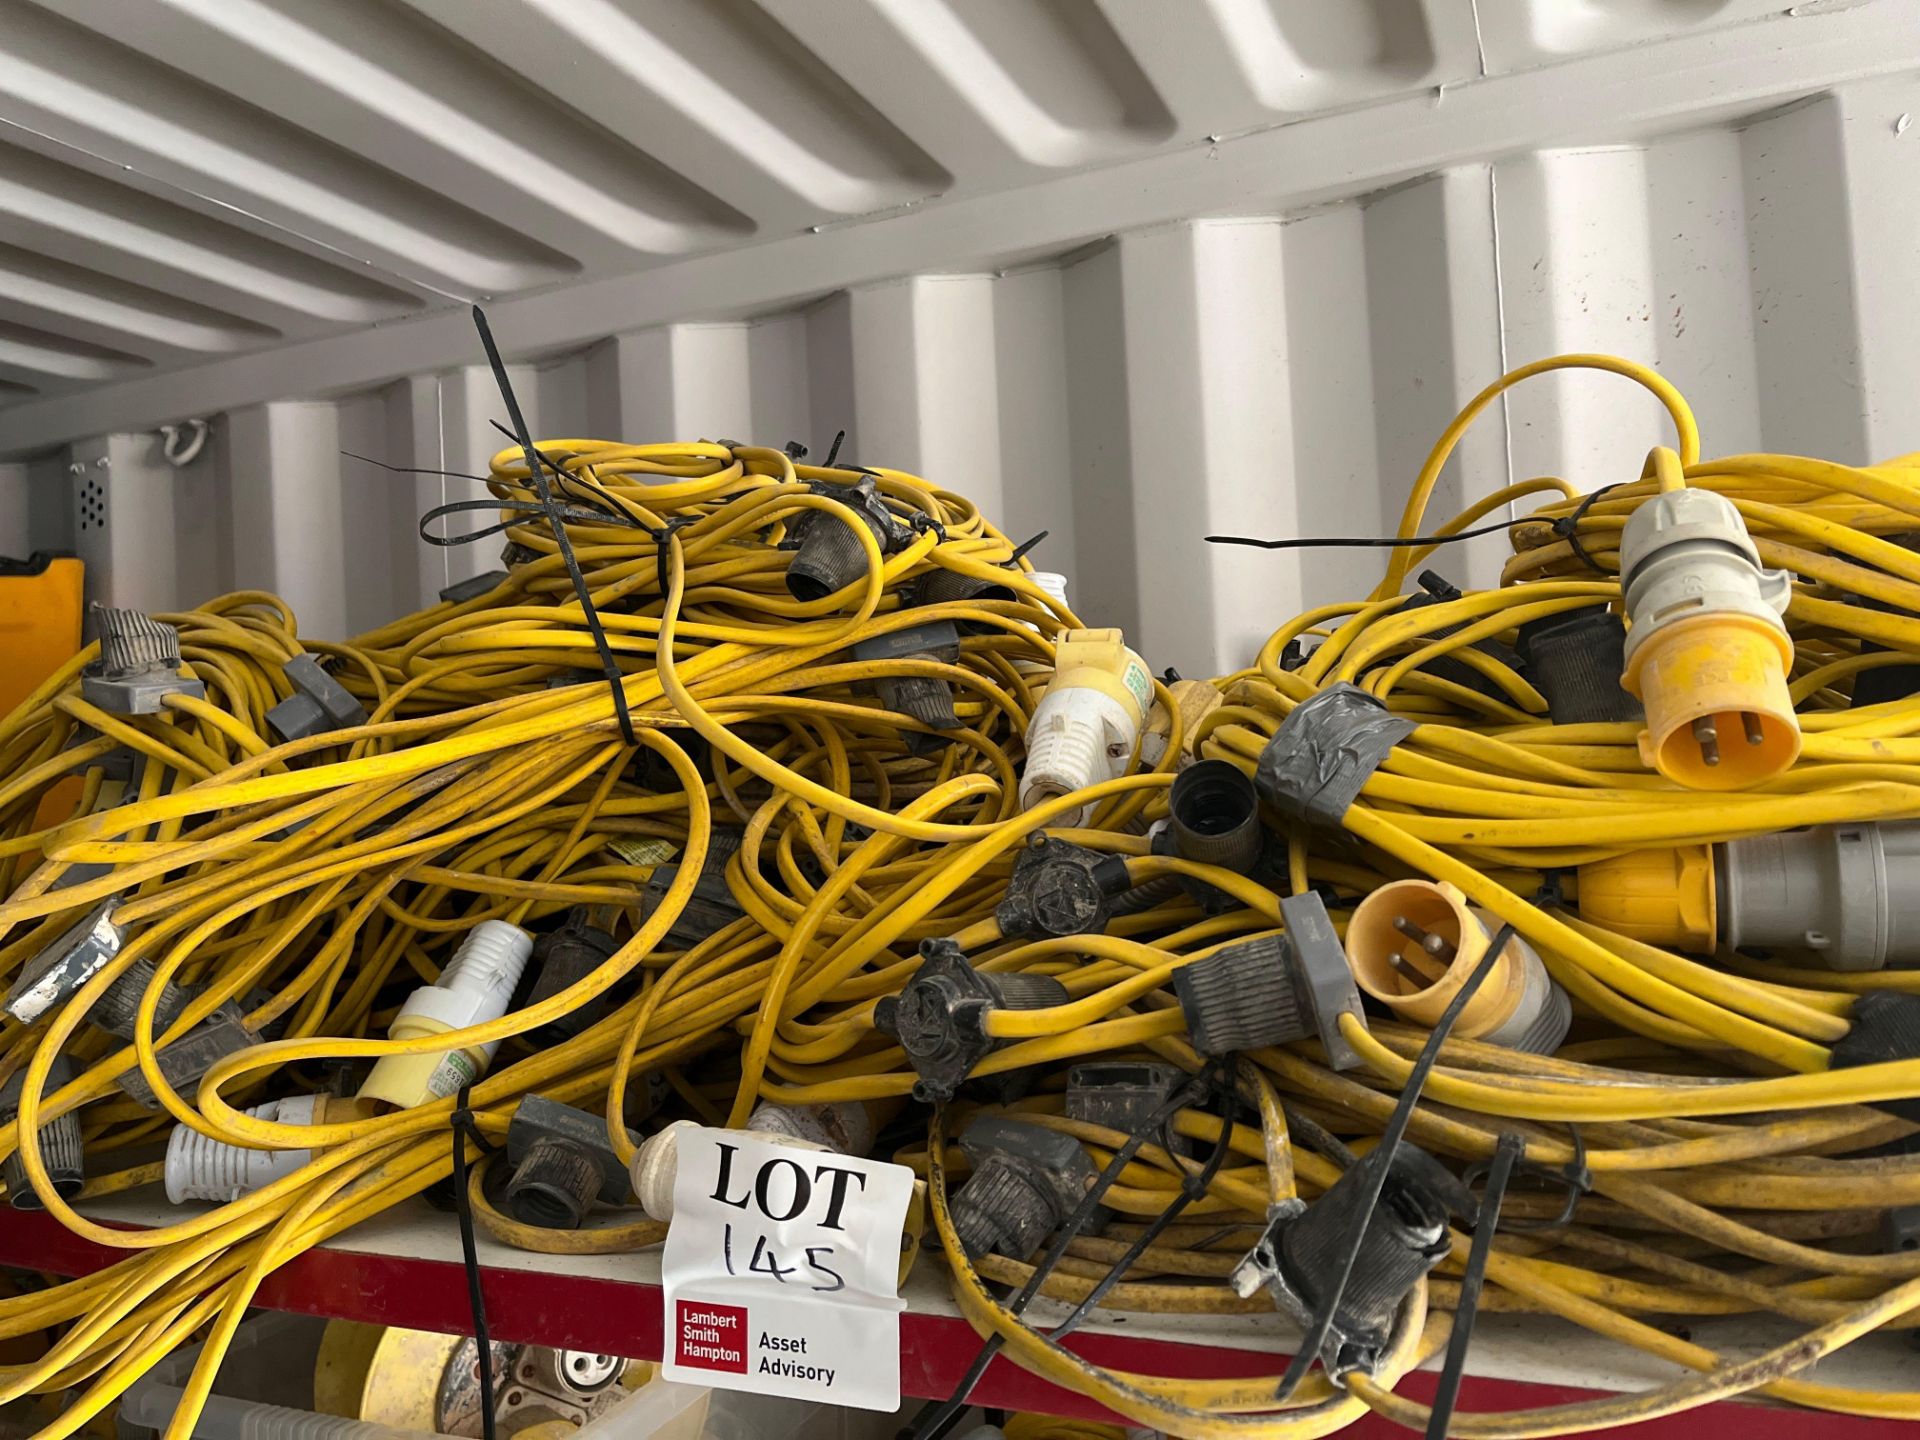 Contents of shelf - various 110v cables as lotted